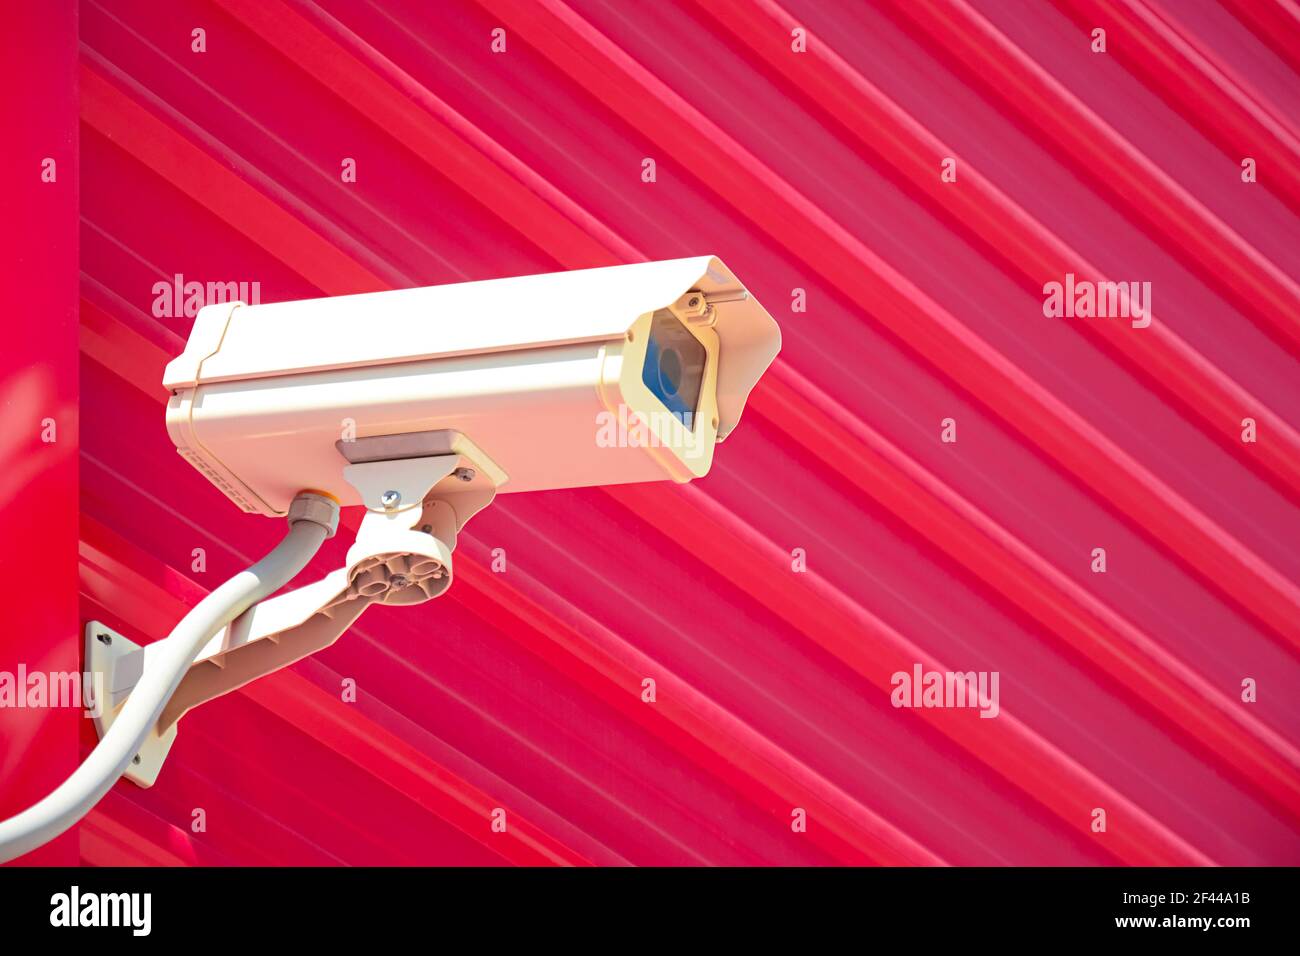 CCTV or surveillance camera on red wall Stock Photo